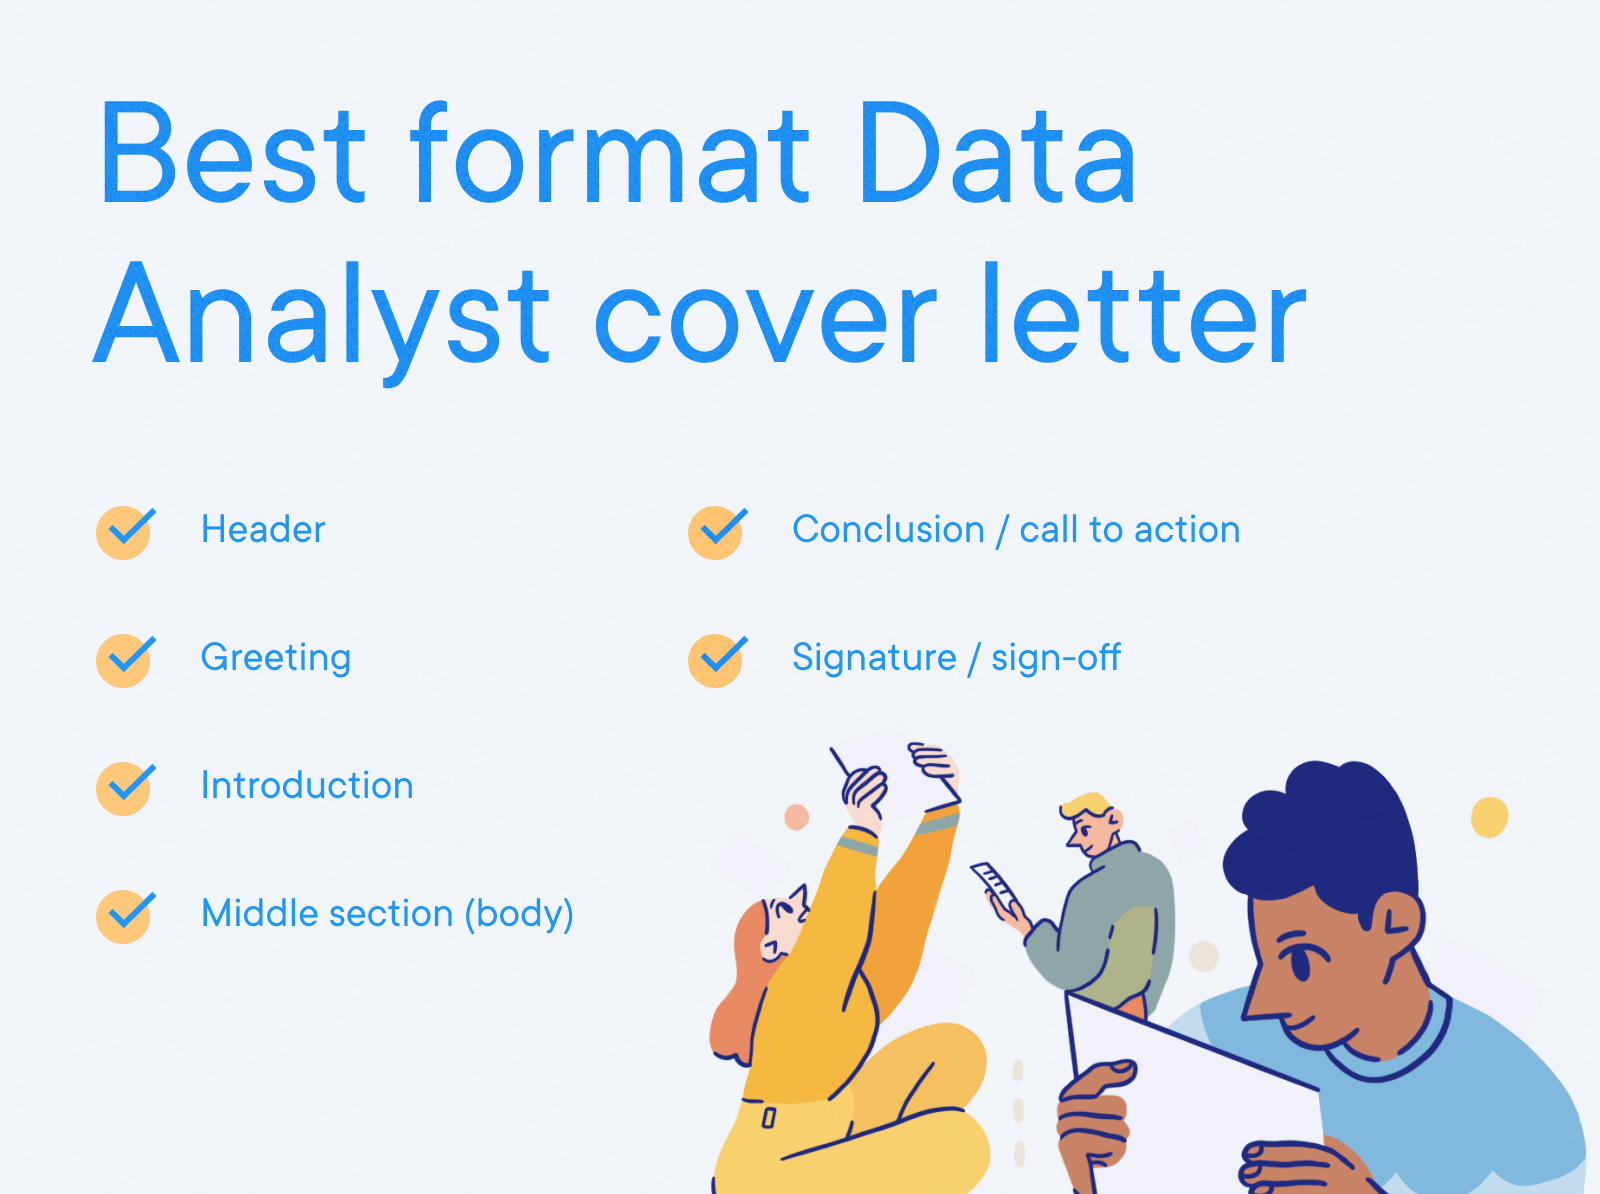 Data Analyst Cover Letter Example - Best format Data Analyst cover letter